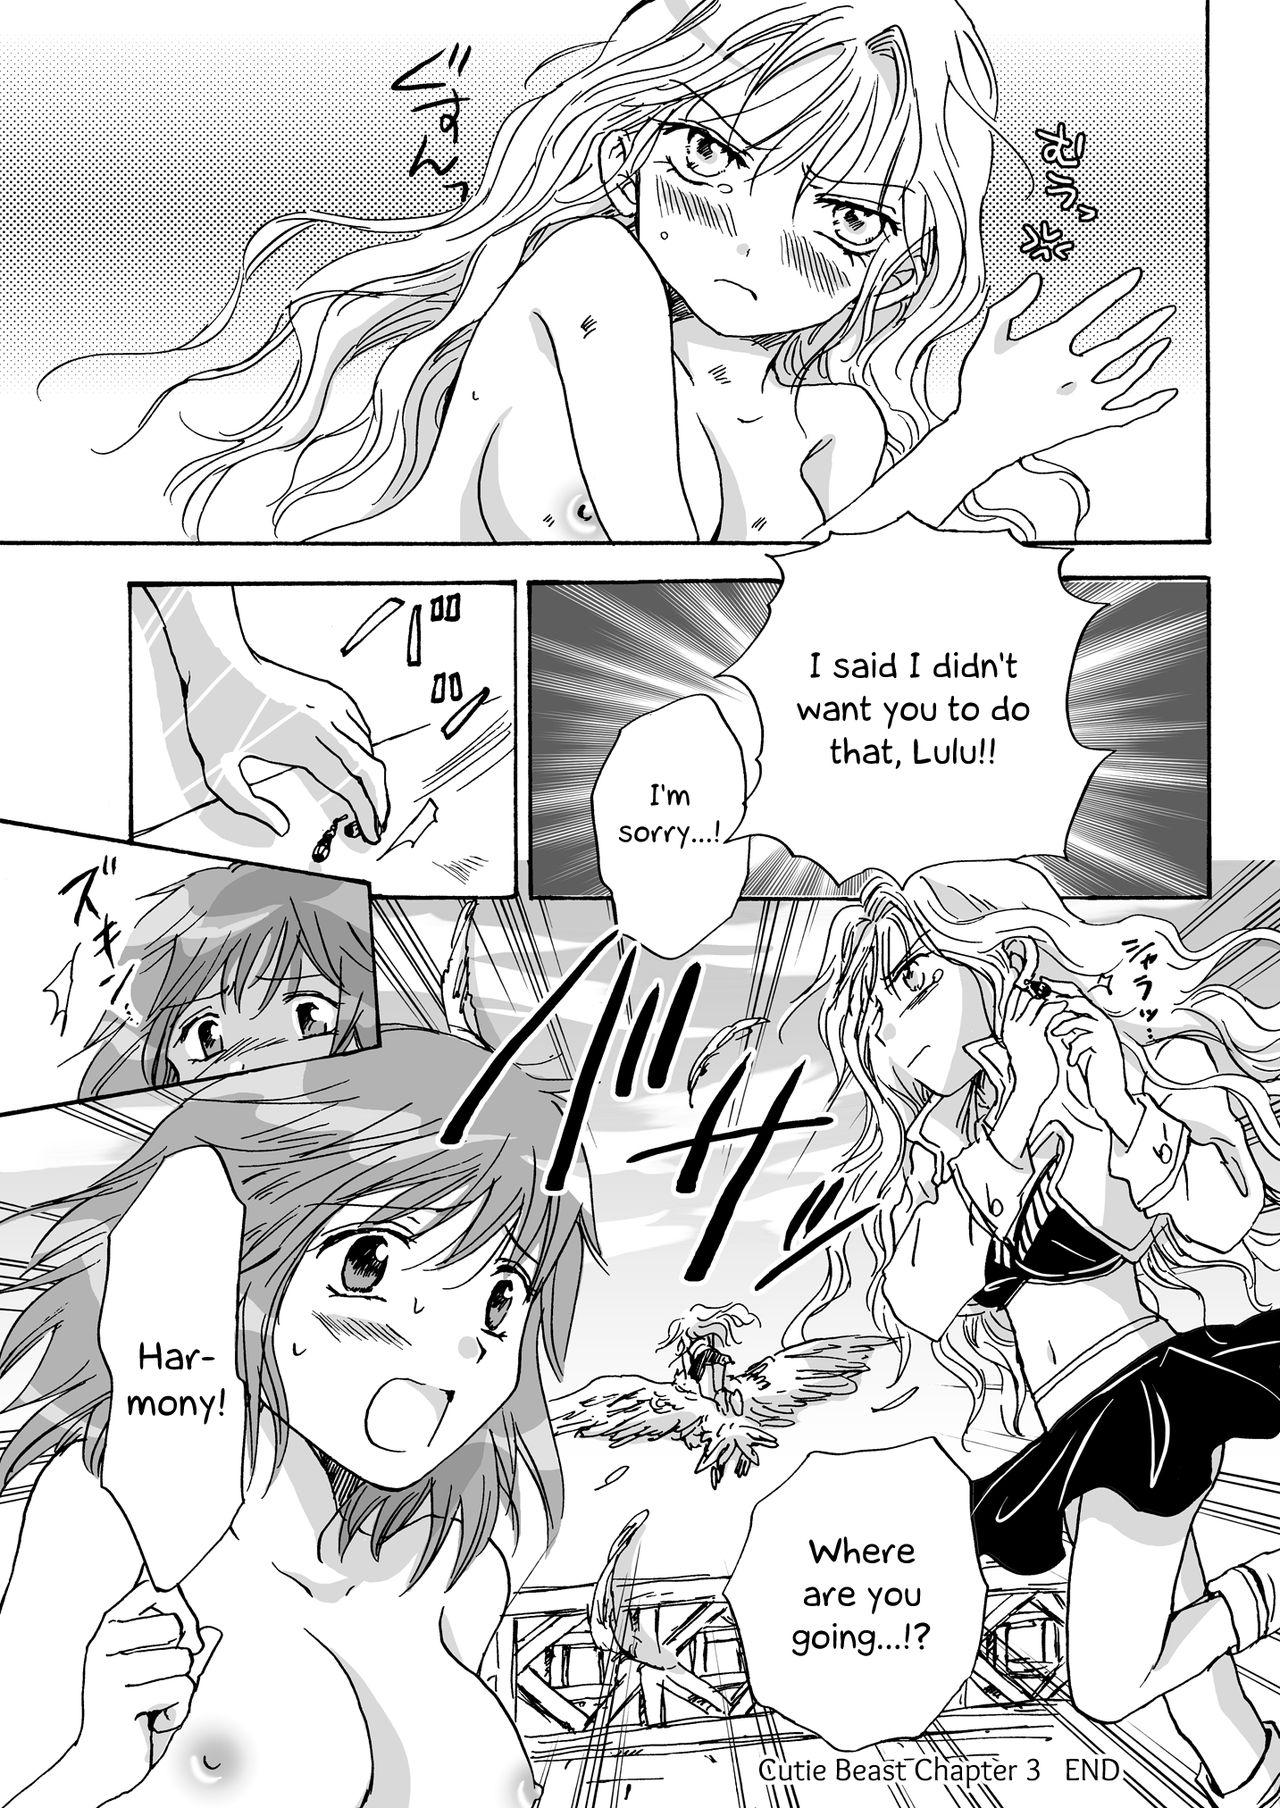 Throat Cutie Beast Complete Edition Ch. 1-3 - Original Sissy - Page 57